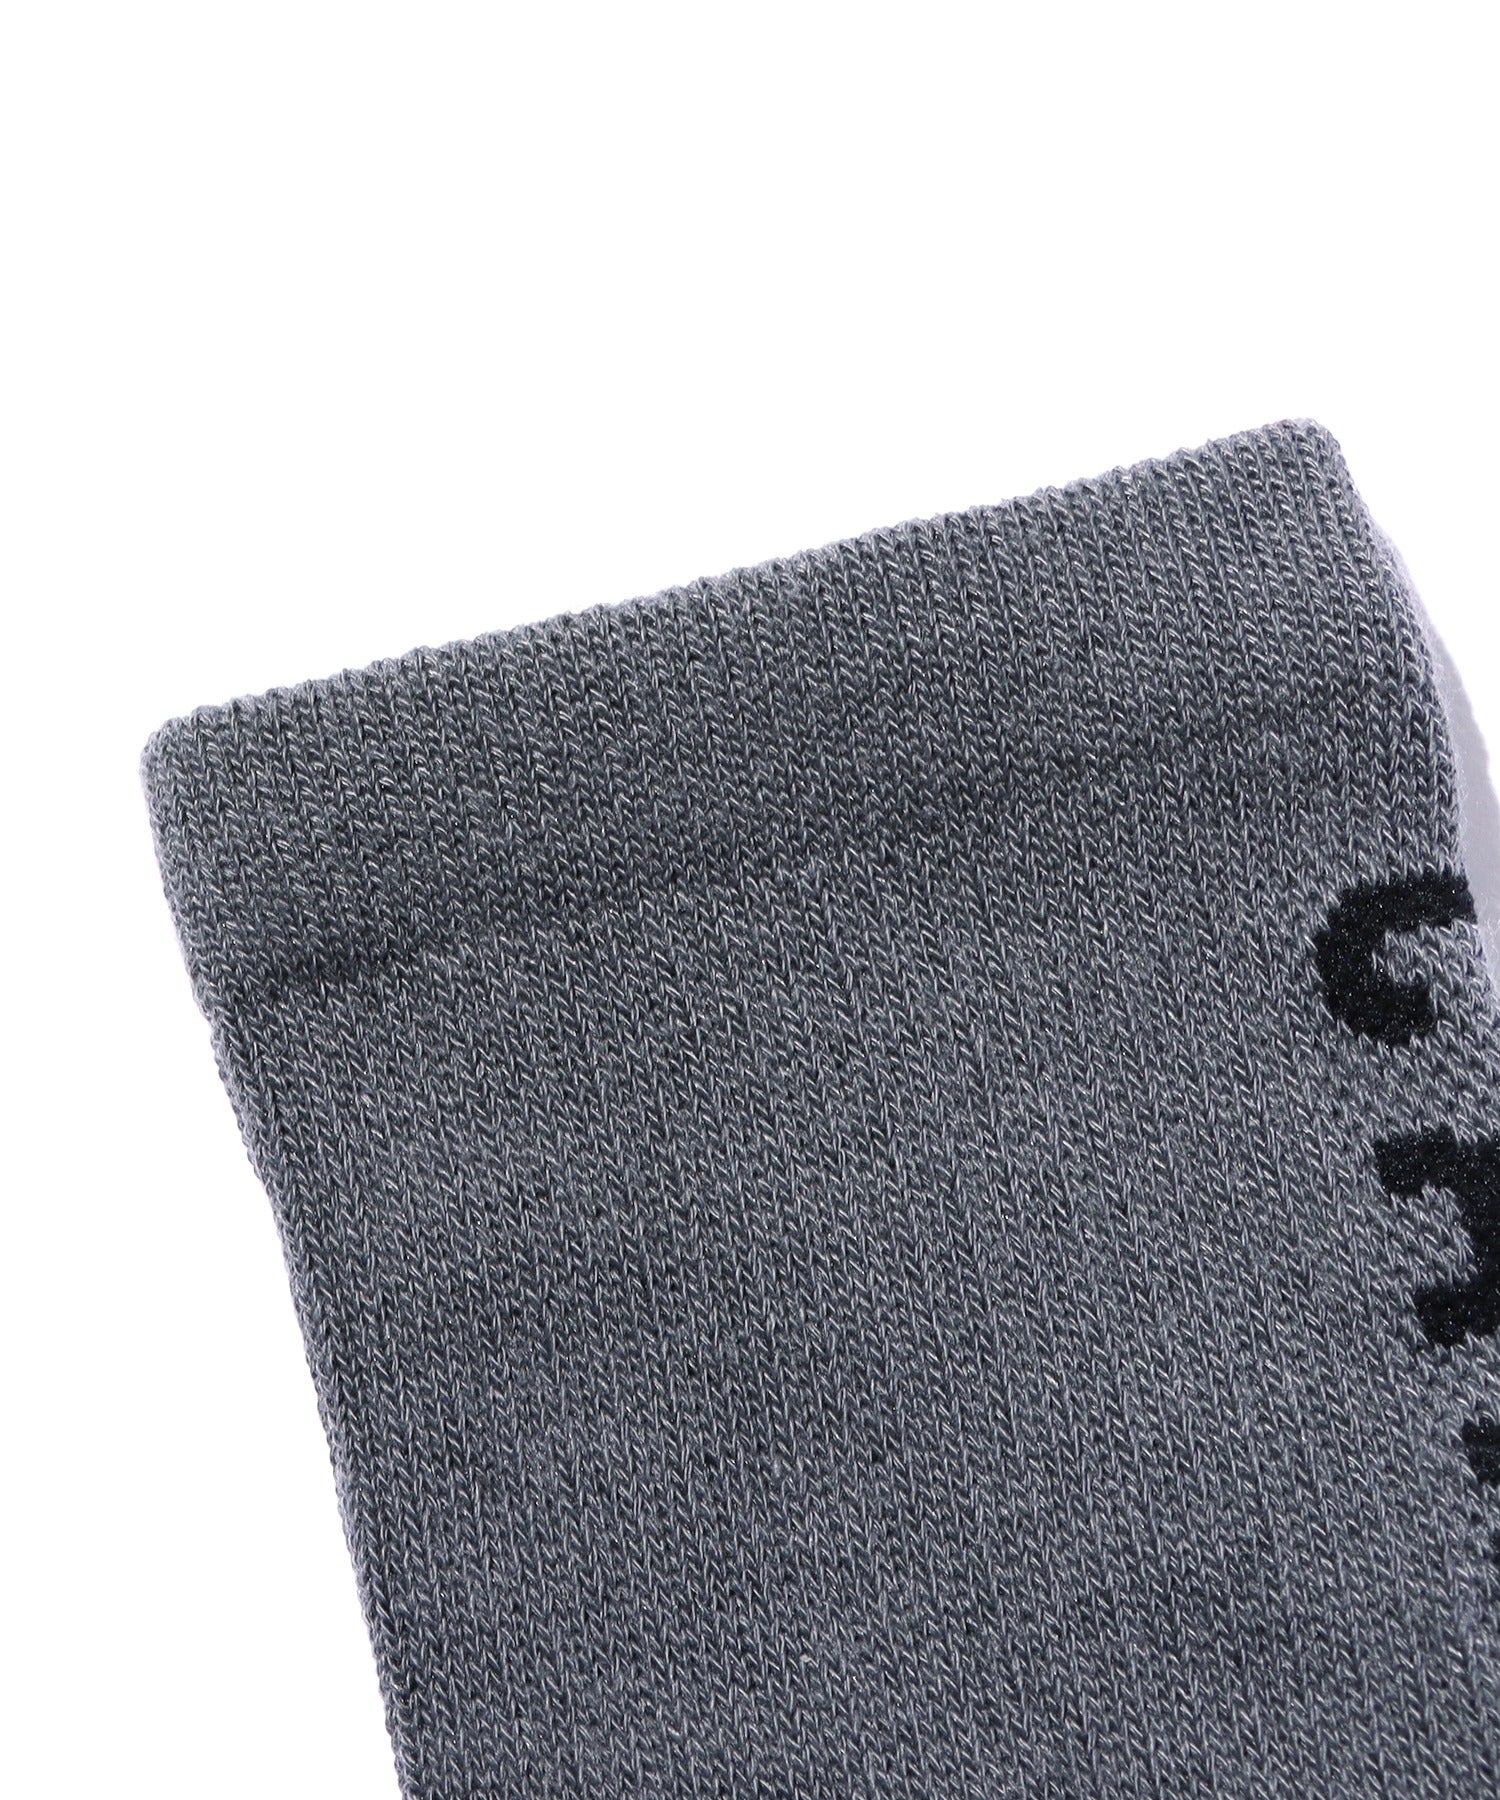 Force Midweight Logo Crew Sock 3 Pack